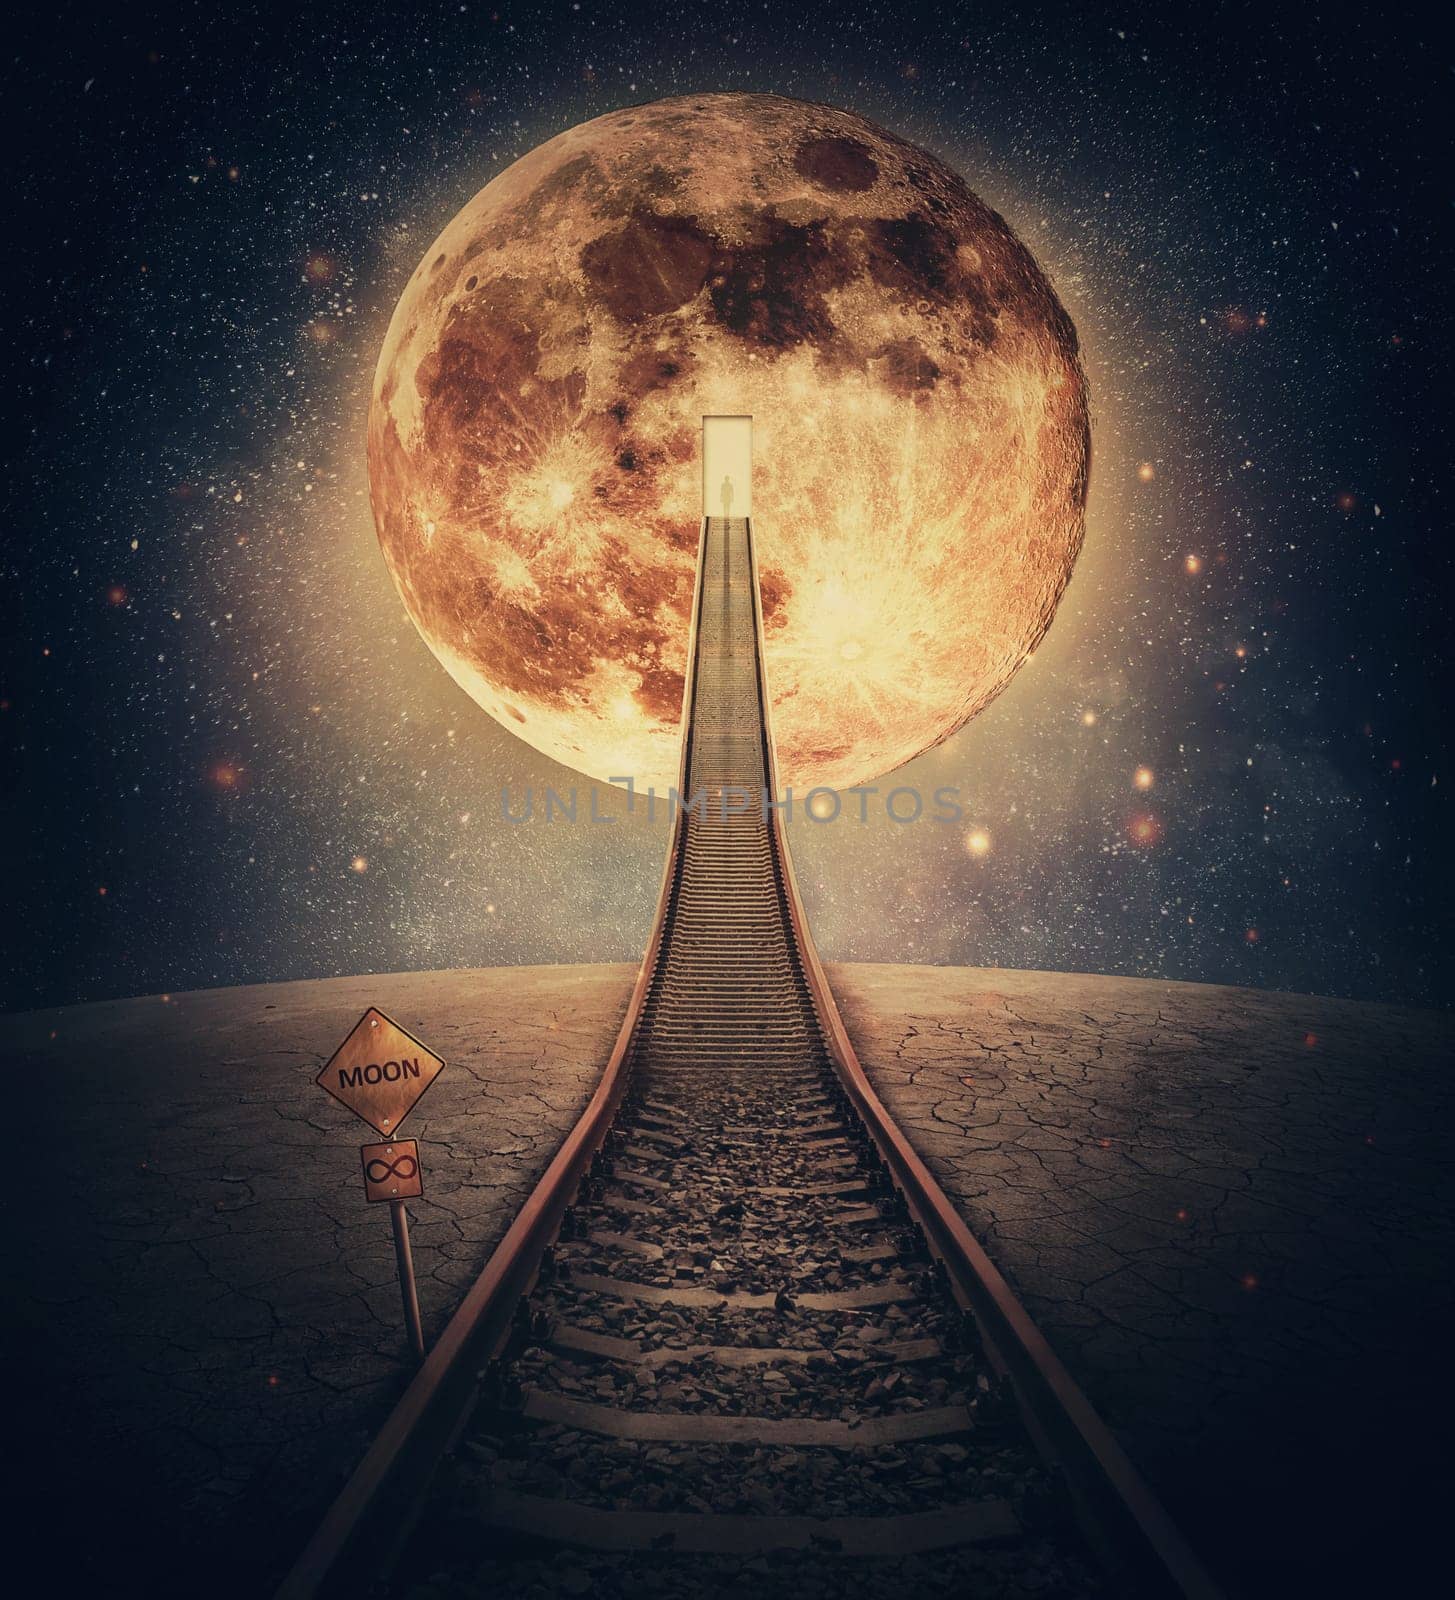 Surreal scene and a railway leading up to the moon. Imaginary night travel on a railroad transforming into a stairway going upwards to a door or portal in the satellite. Mystic space traveling concept by psychoshadow